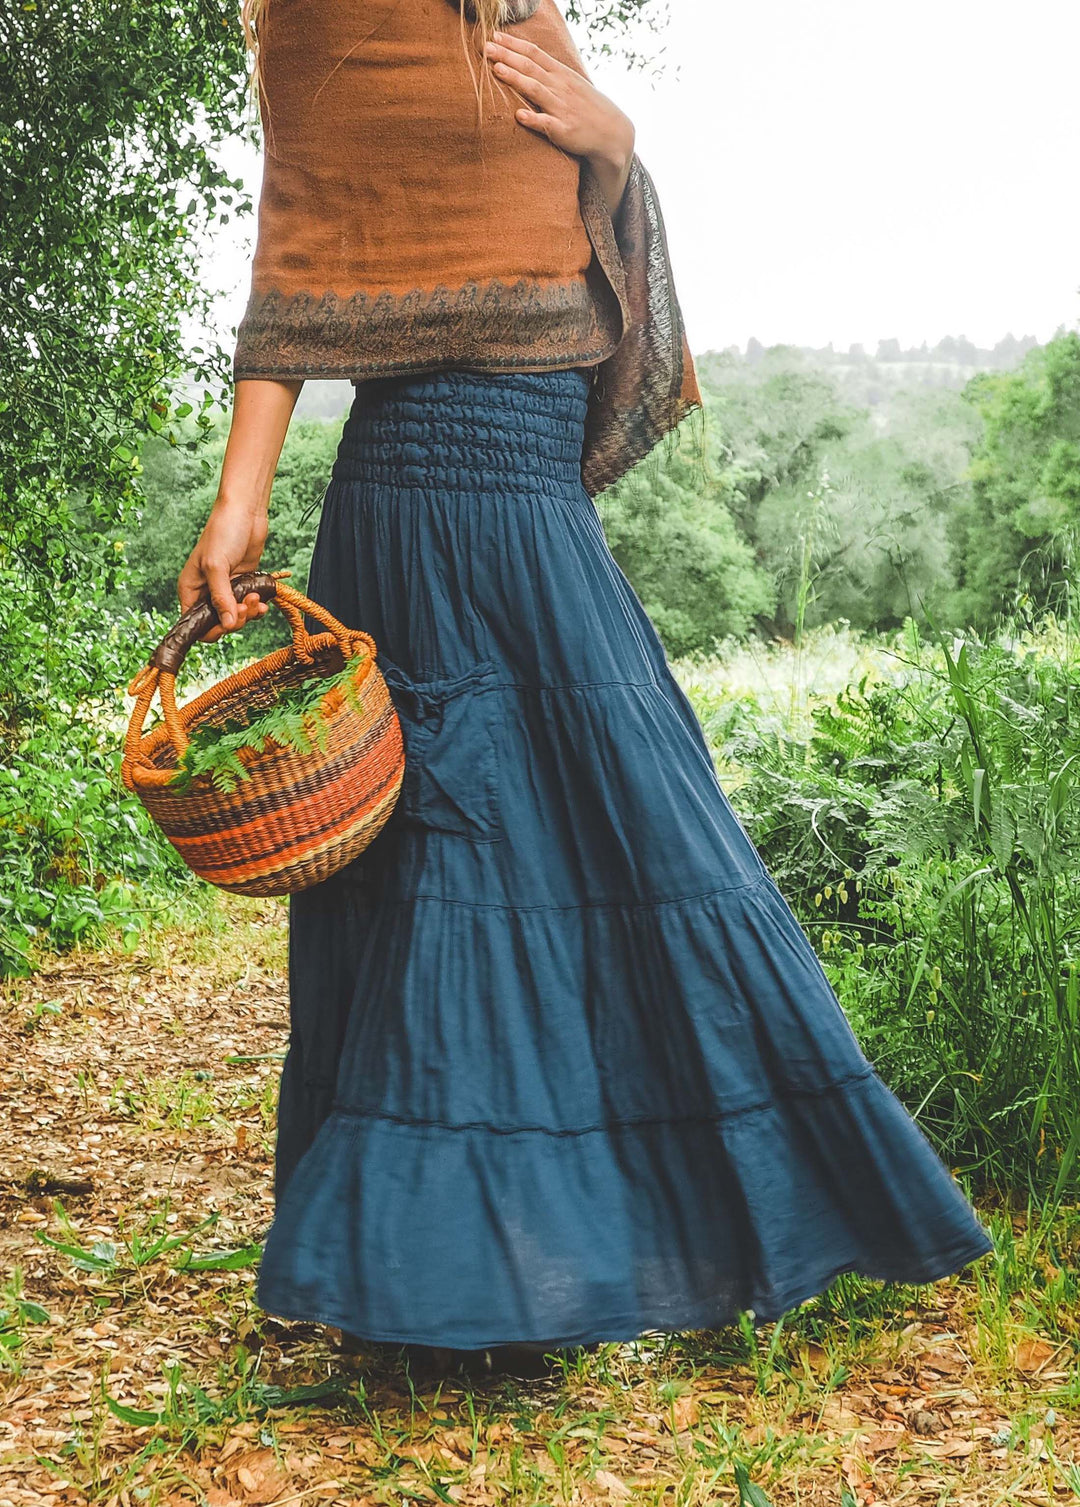 Model is wearing blue maxi skirt with side pocket and shawl. They are carrying a colorful basket in their right hand.